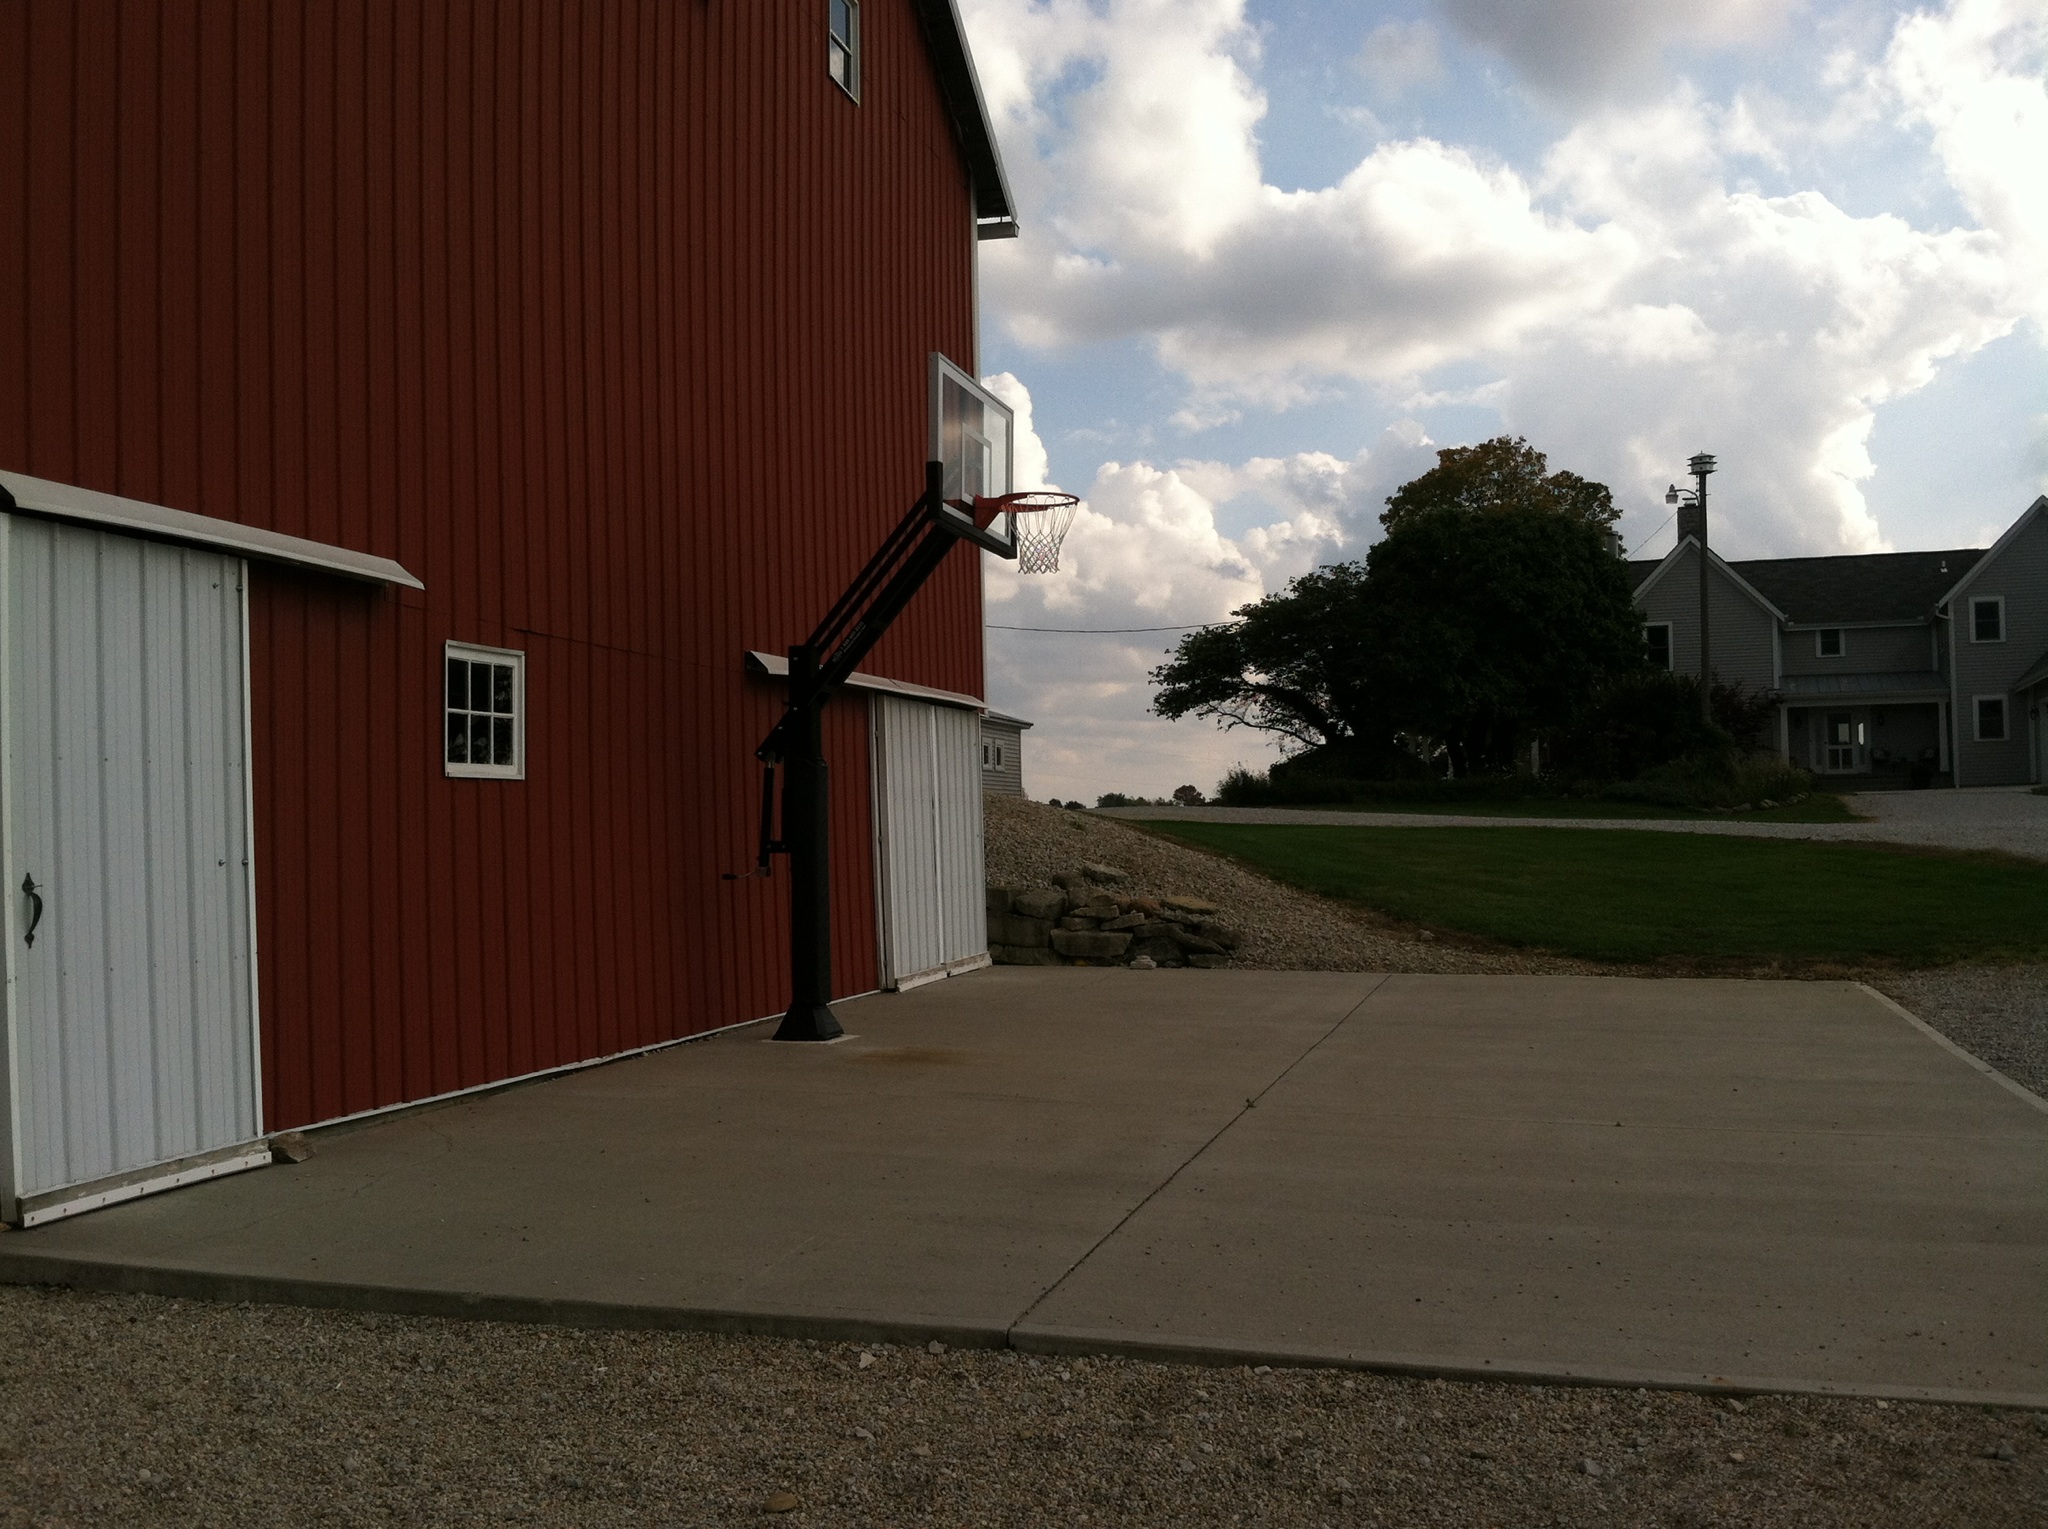 Alongside this Ohio barn stands this Pro Dunk Gold Basketball system.